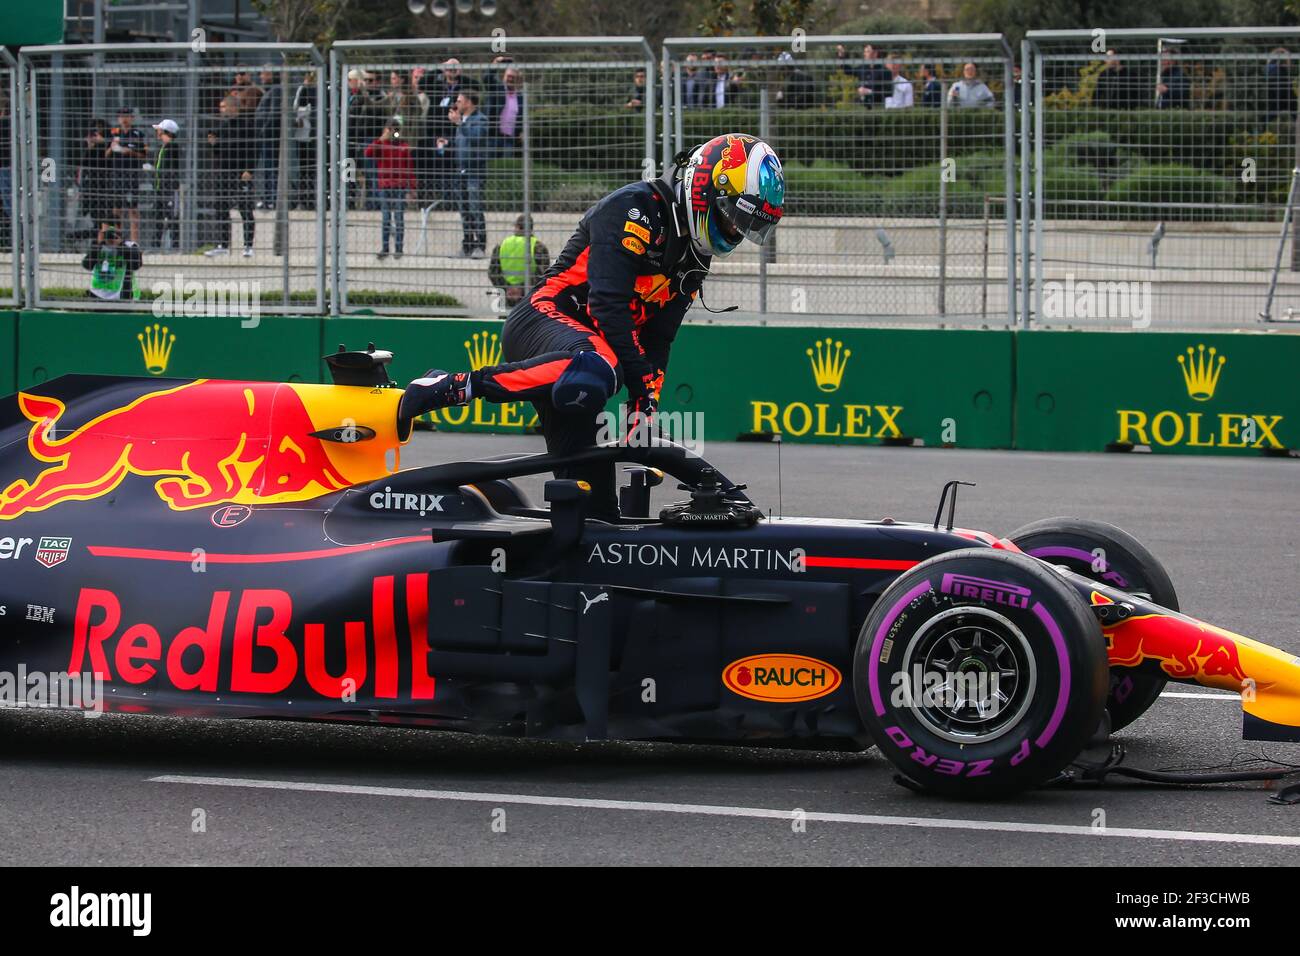 RICCIARDO Daniel (aus), Aston Martin Red Bull Tag Heuer RB14, getting out of his car after his crash with VERSTAPPEN Max (ned), Aston Martin Red Bull Tag Heuer RB14, during the 2018 Formula One World Championship, Grand Prix of Europe in Azerbaijan from April 26 to 29 in Baku - Photo Sebastiaan Rozendaal / DPPI Stock Photo